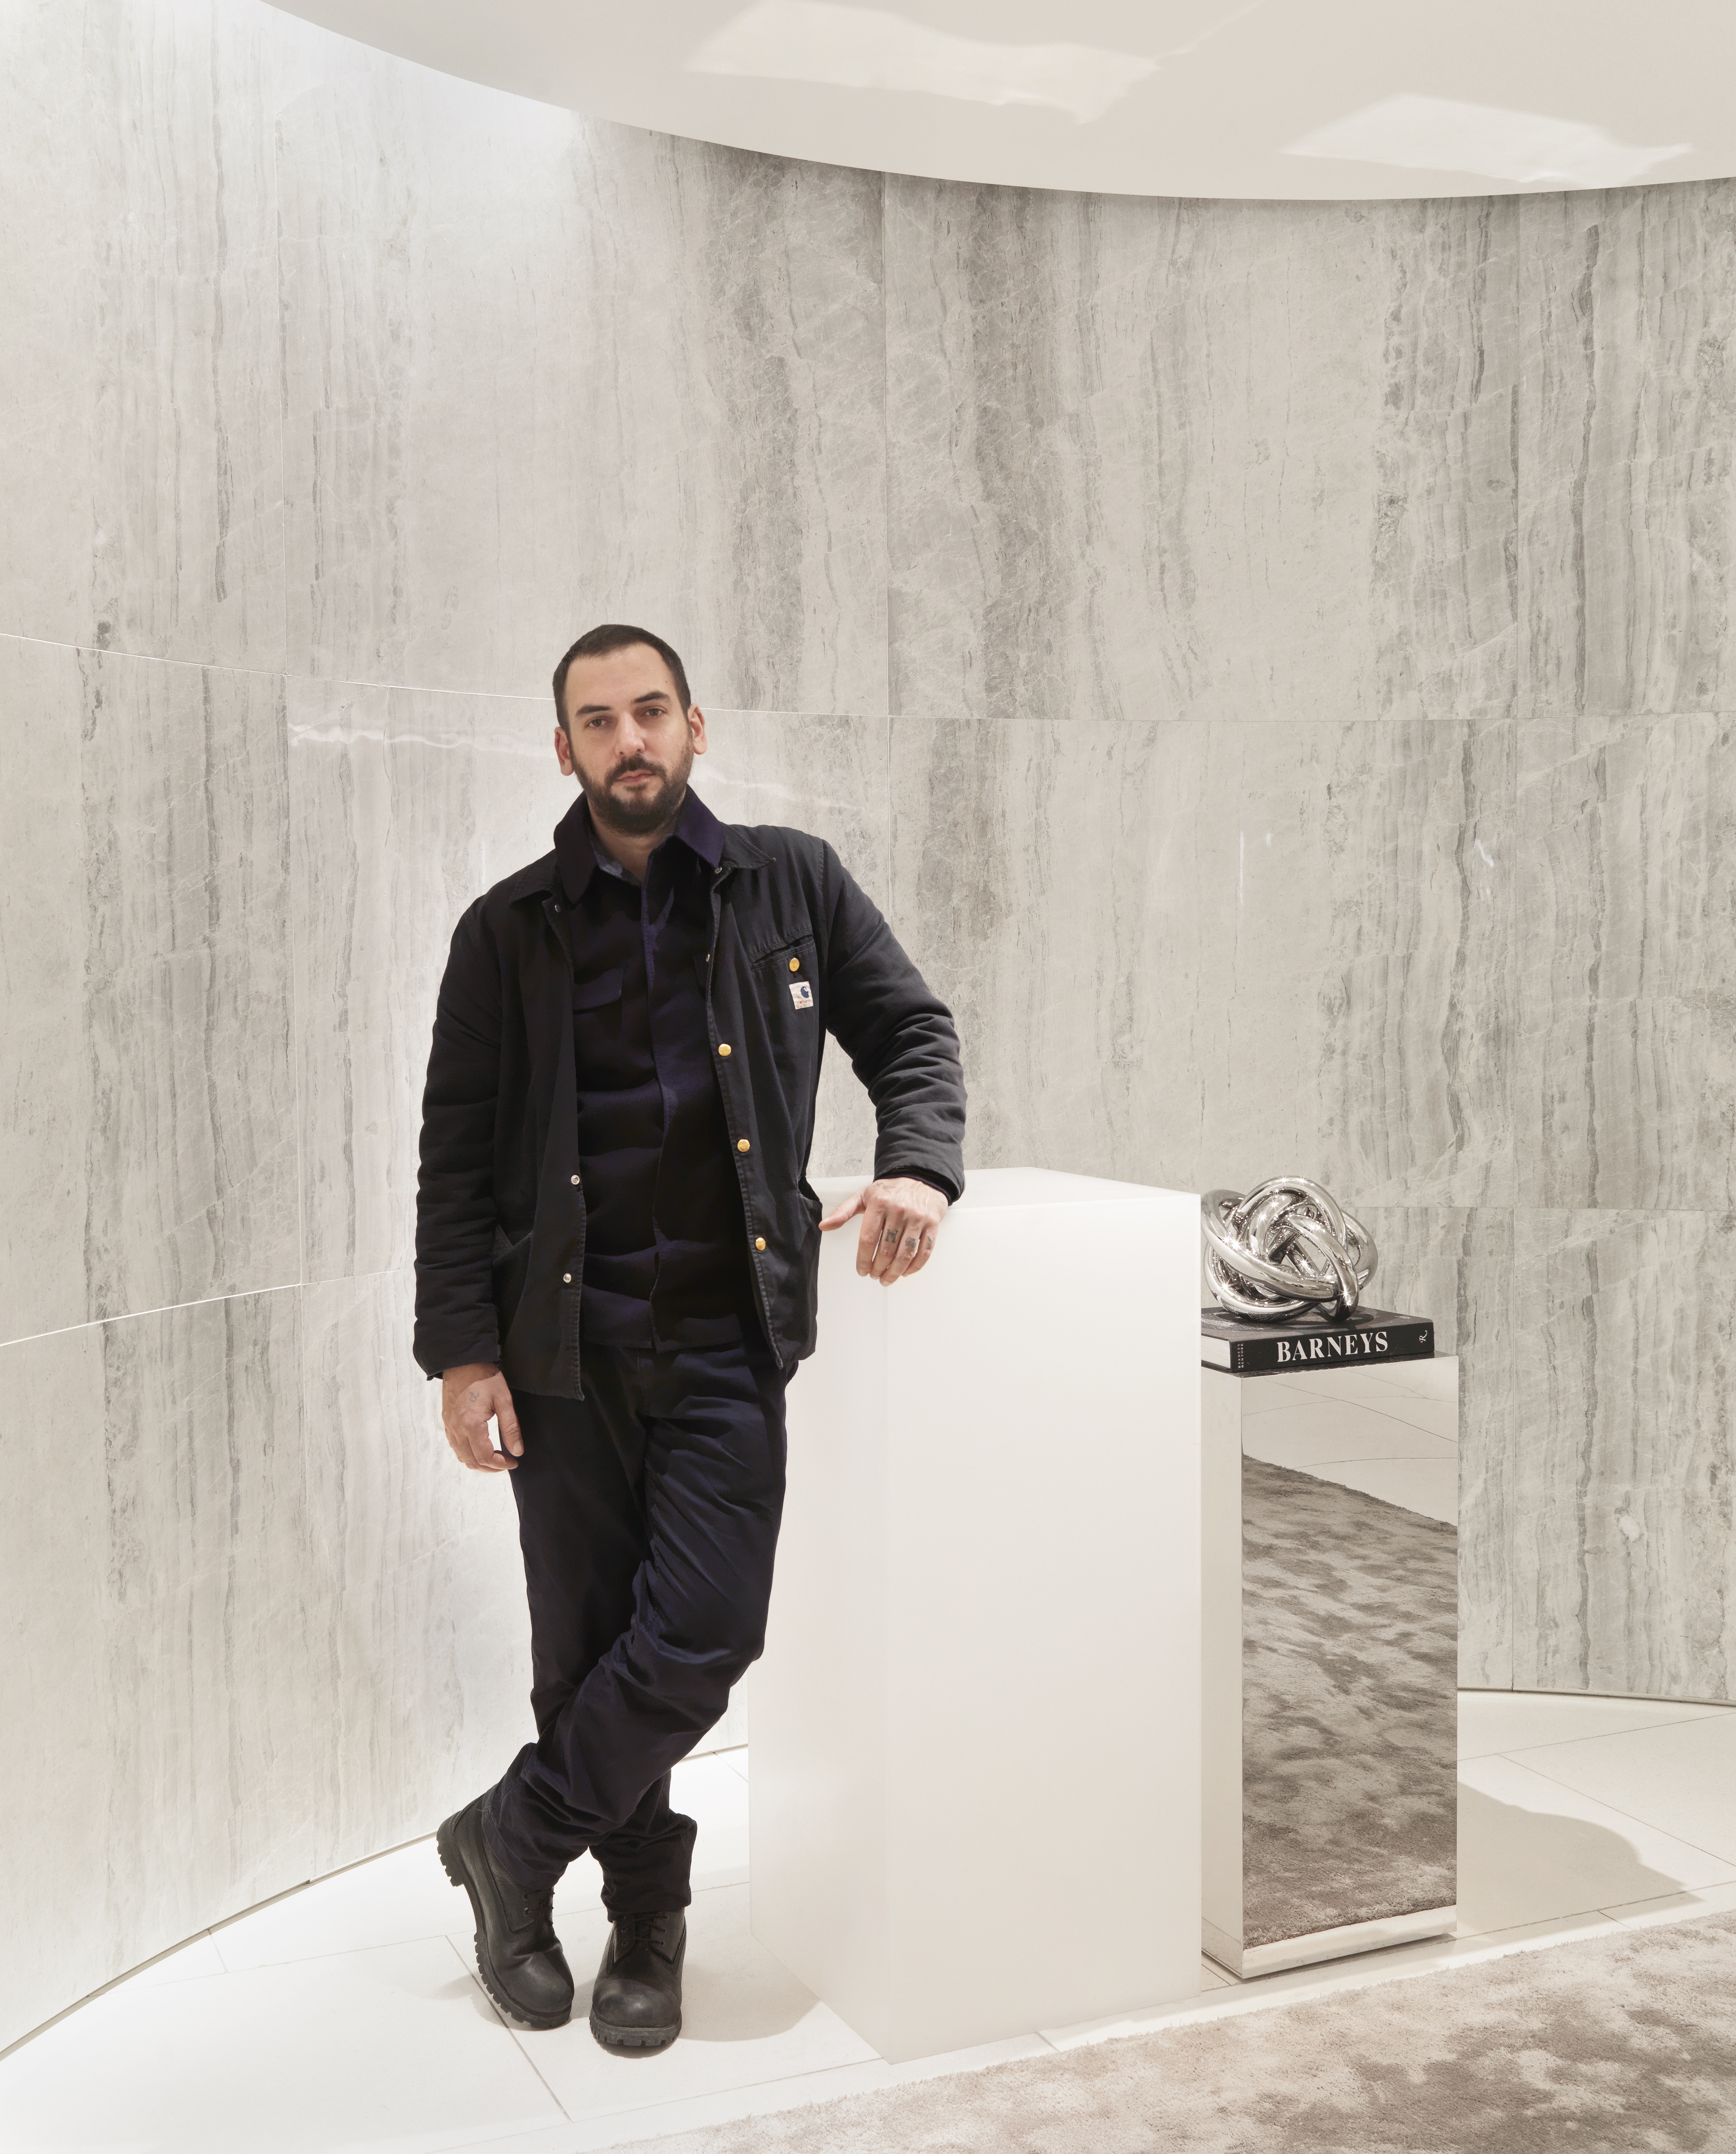 Creative Director Matthew Mazzucca is taking Barneys into new territory with immersive experiences and artist collaborations.